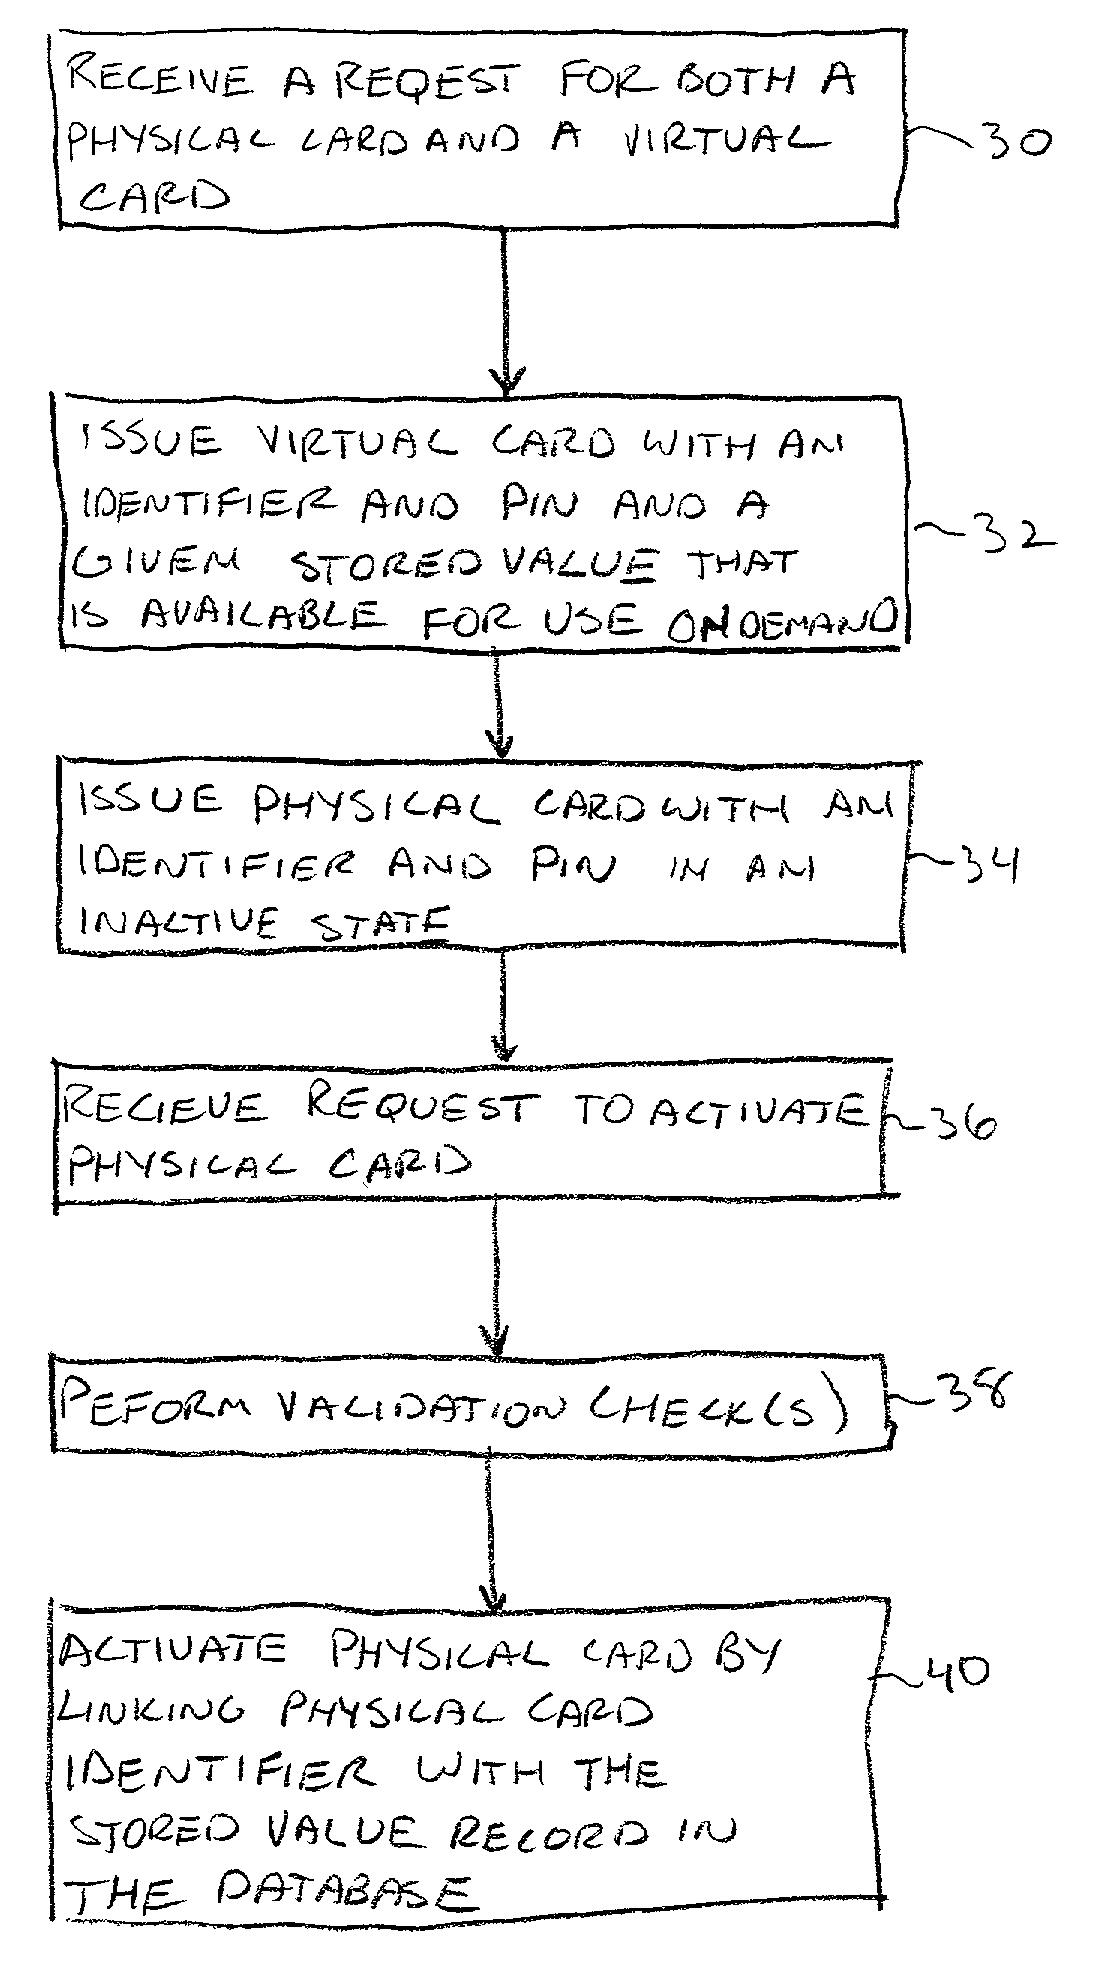 Stored value cards and methods for their issuance